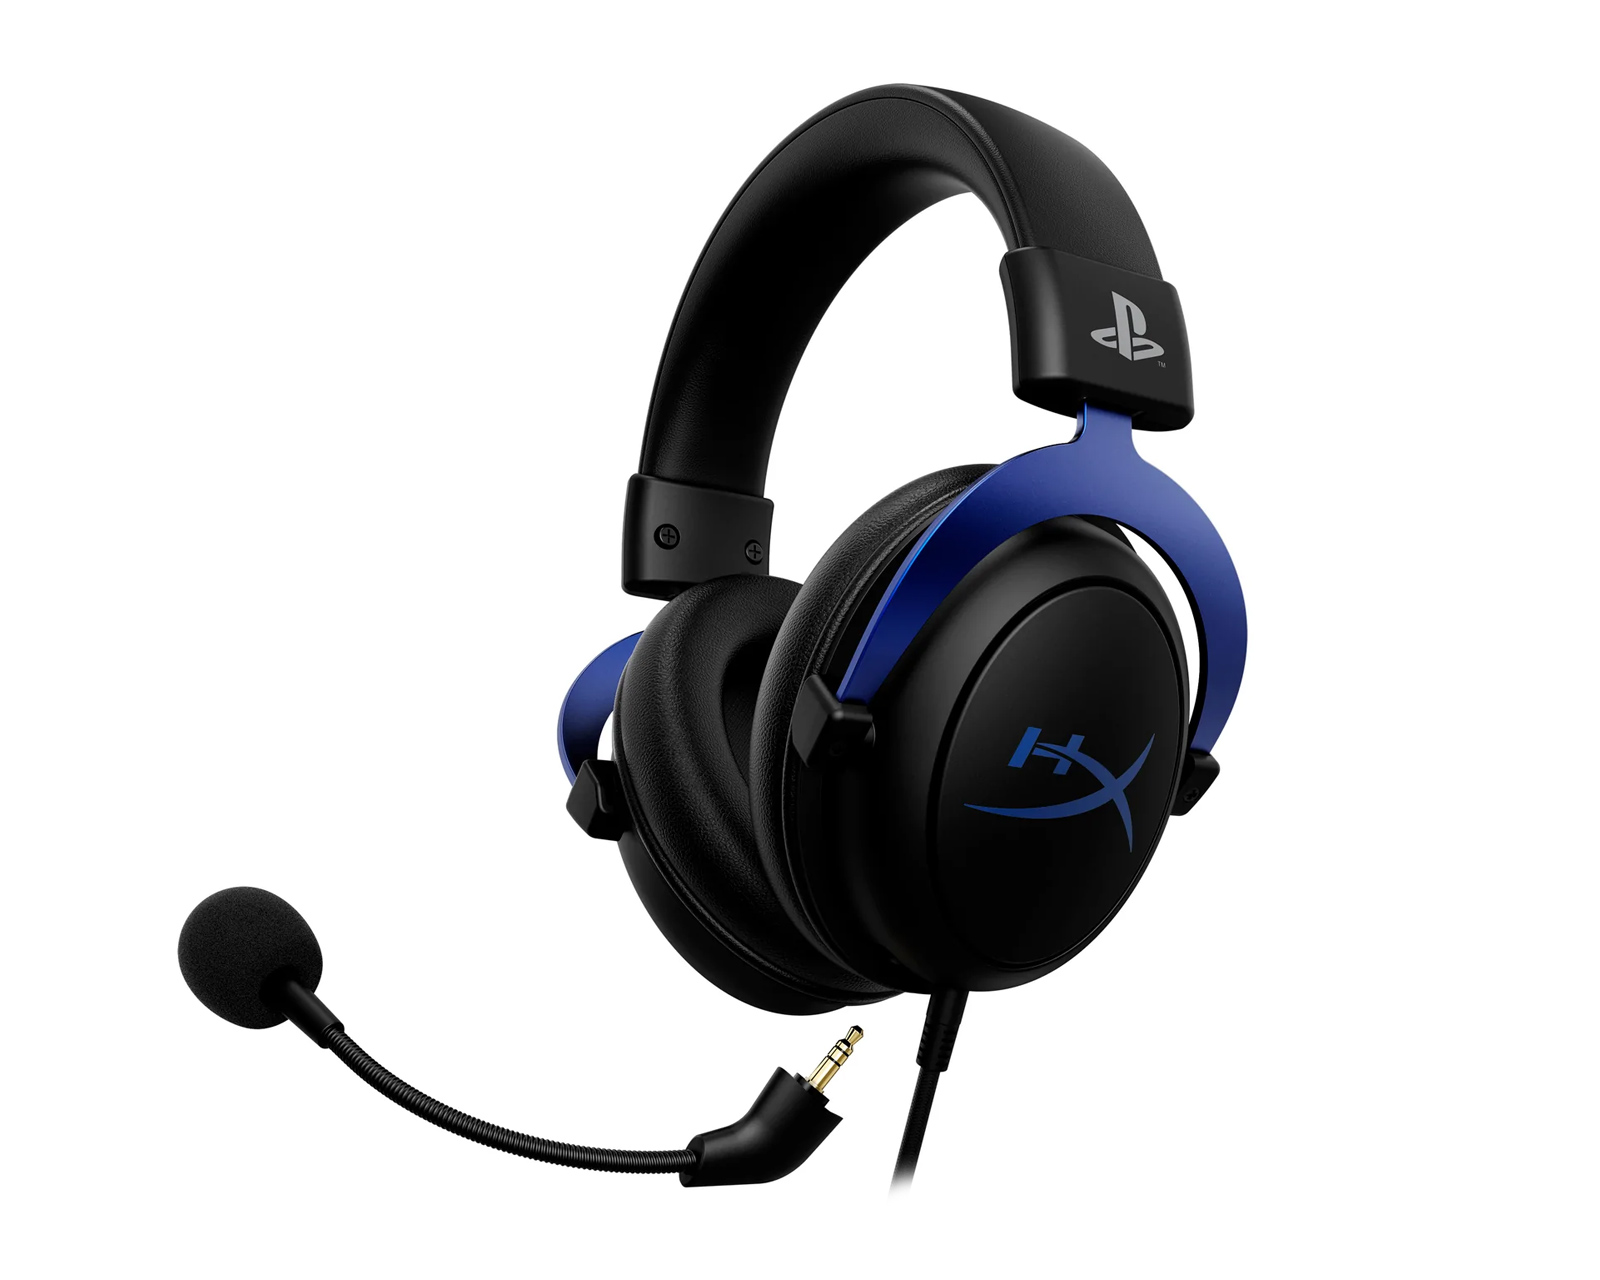  HyperX Cloud Alpha Wireless - Gaming Headset for PC